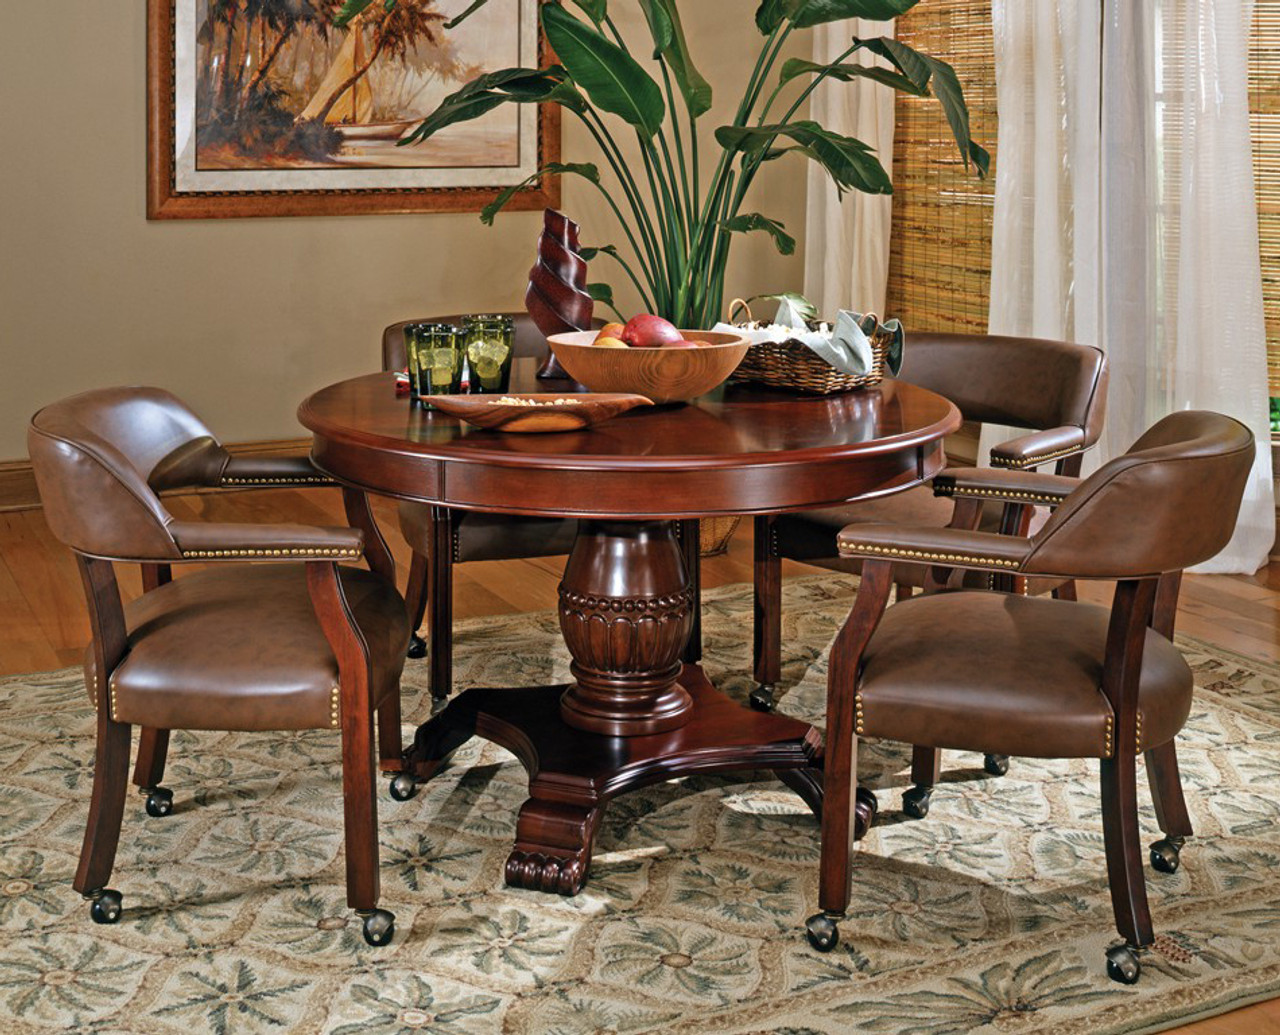 Showdown Brown Arm Chair With Casters Cb Furniture